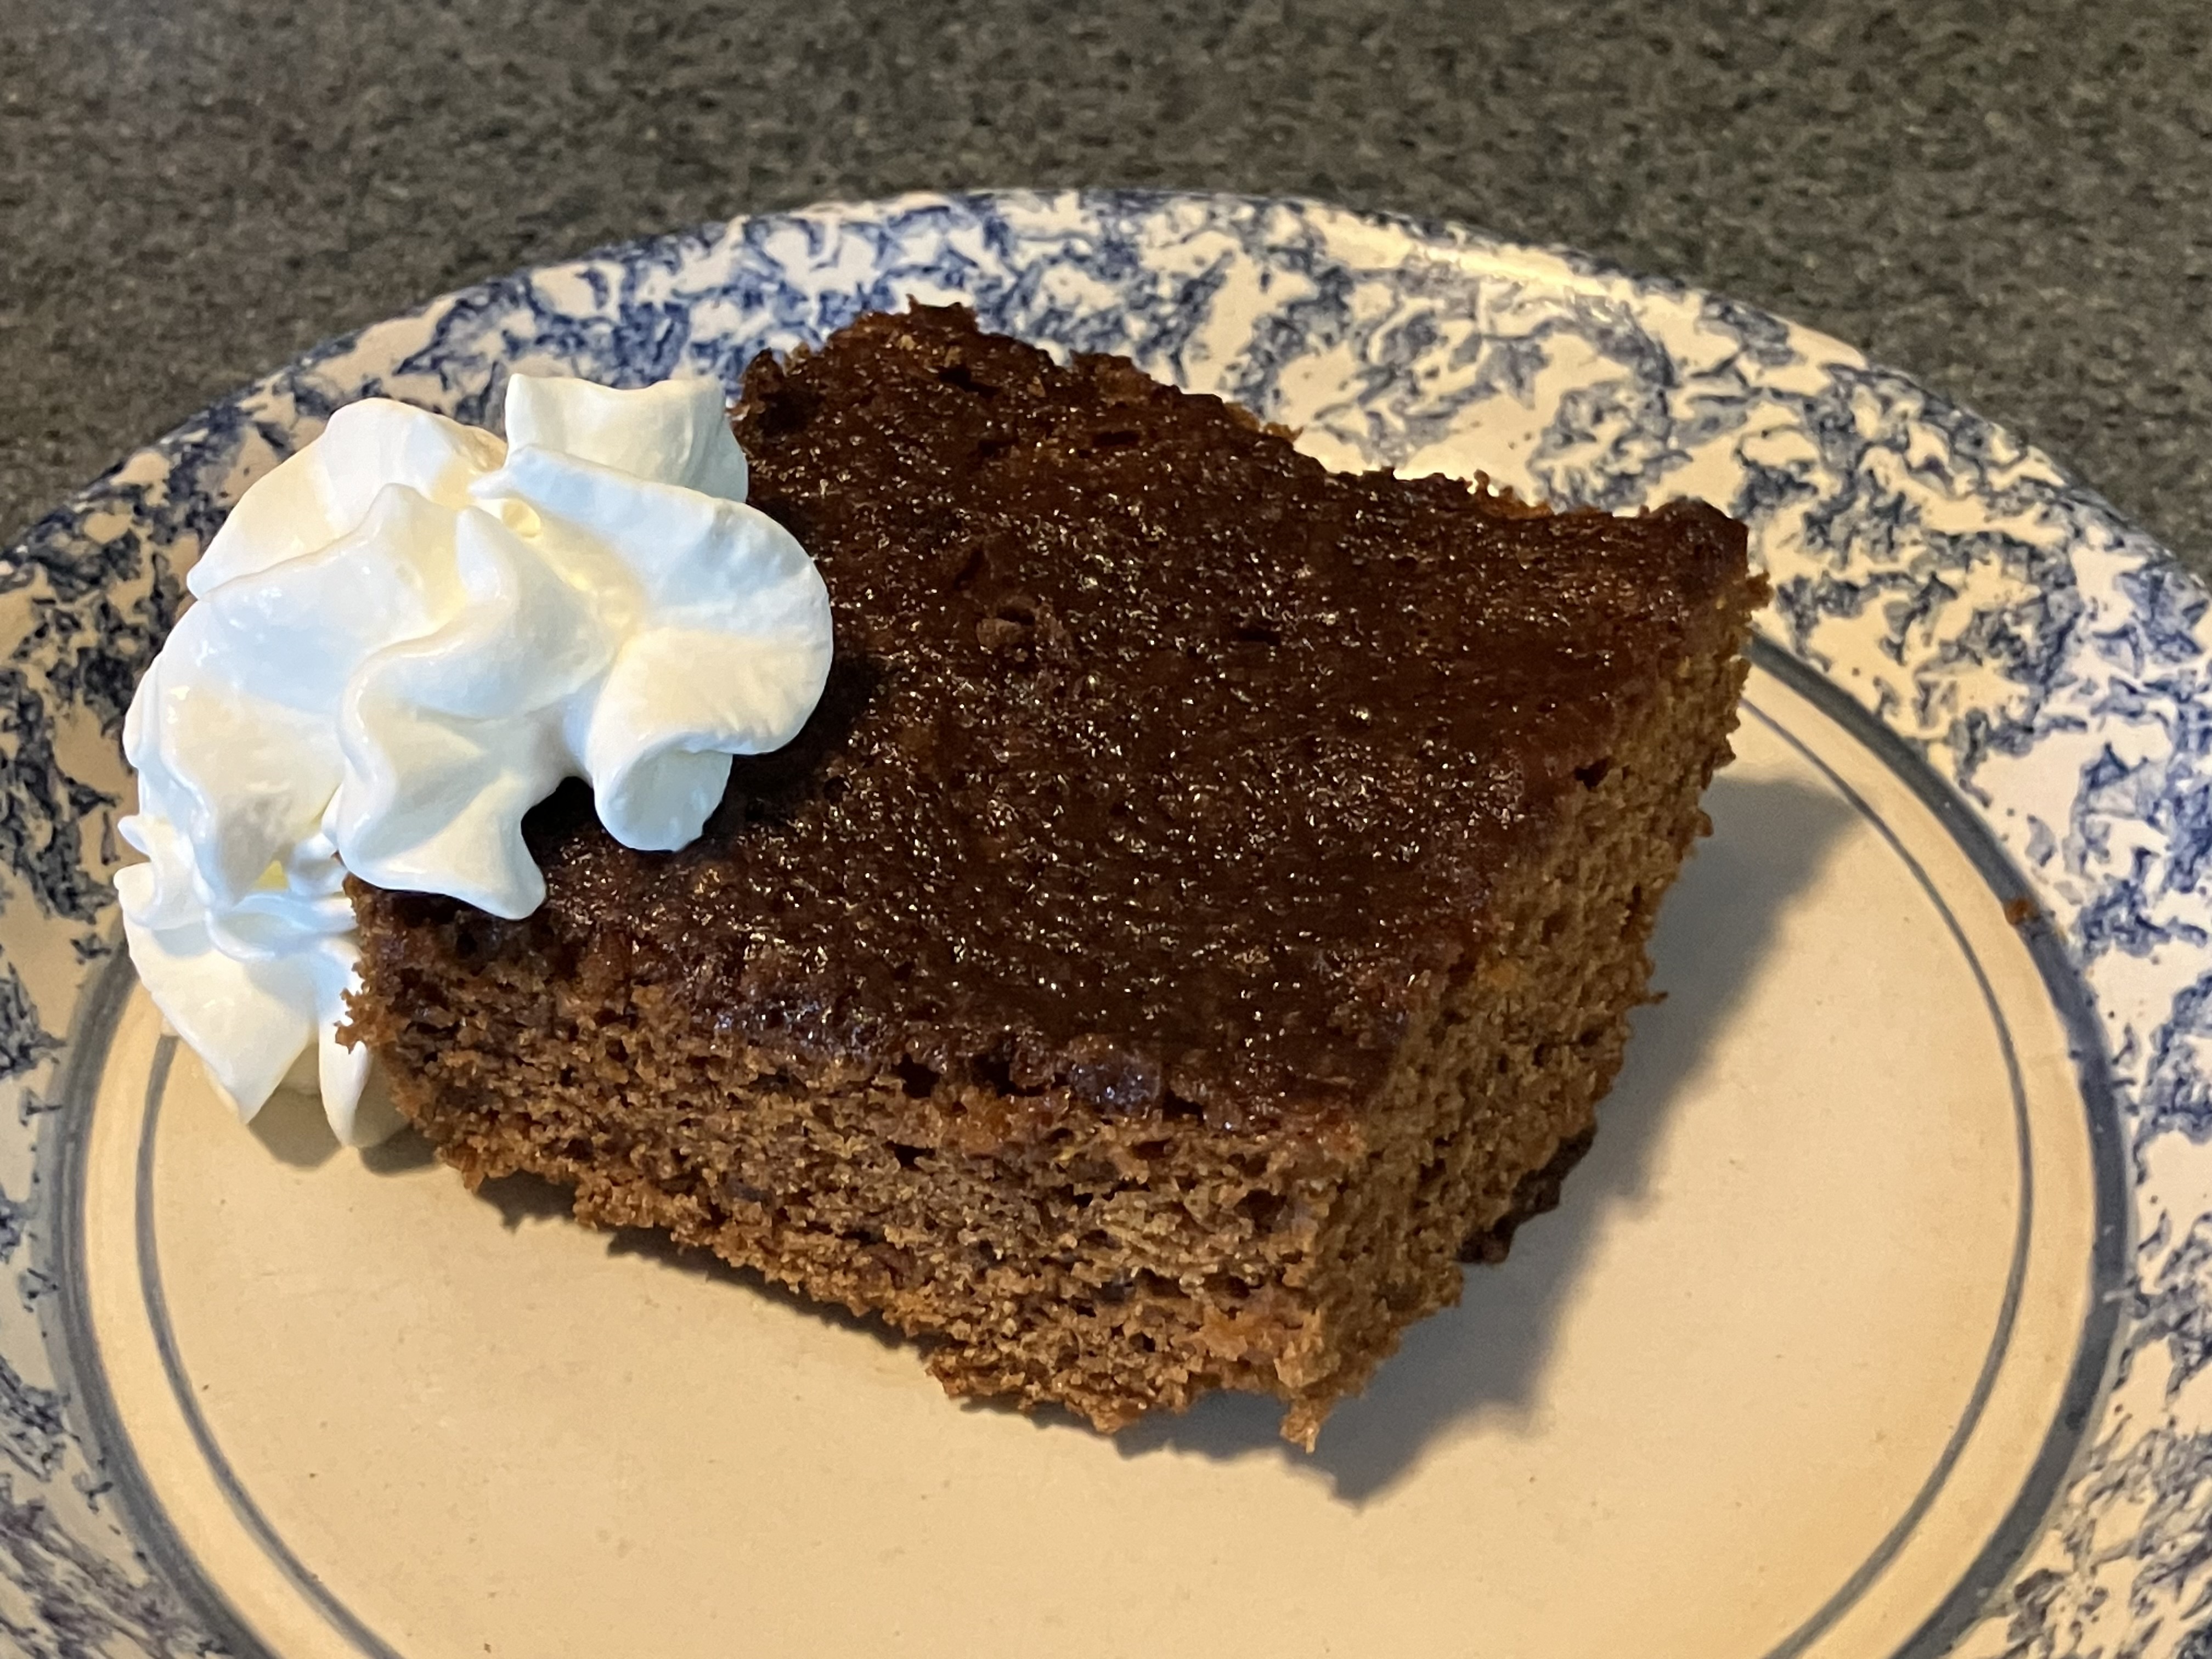 A slice of brown cake sits on a plate with whipped cream.